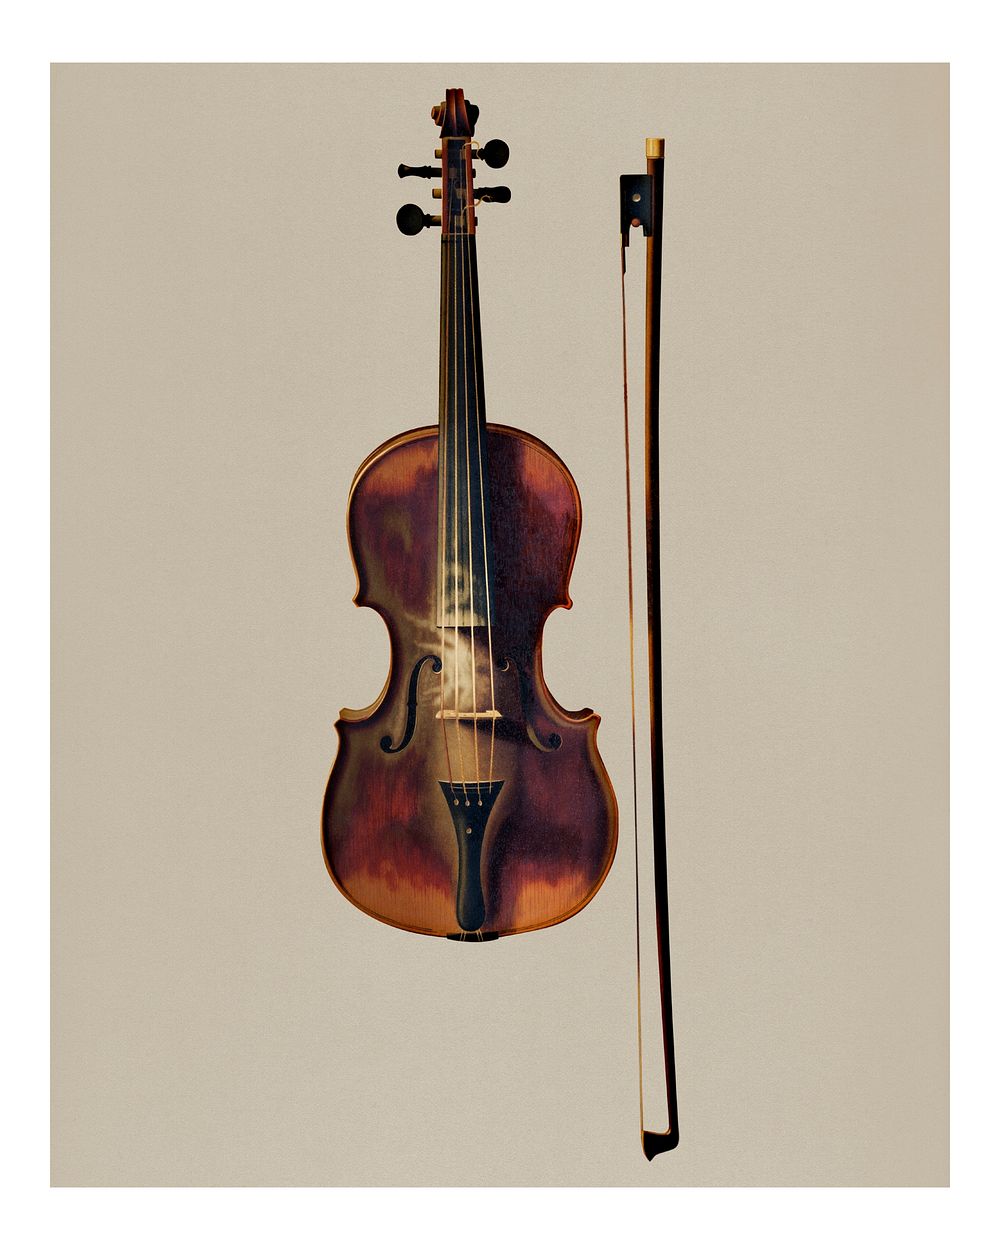 Vintage Still Life with a Violin illustration wall art print and poster.